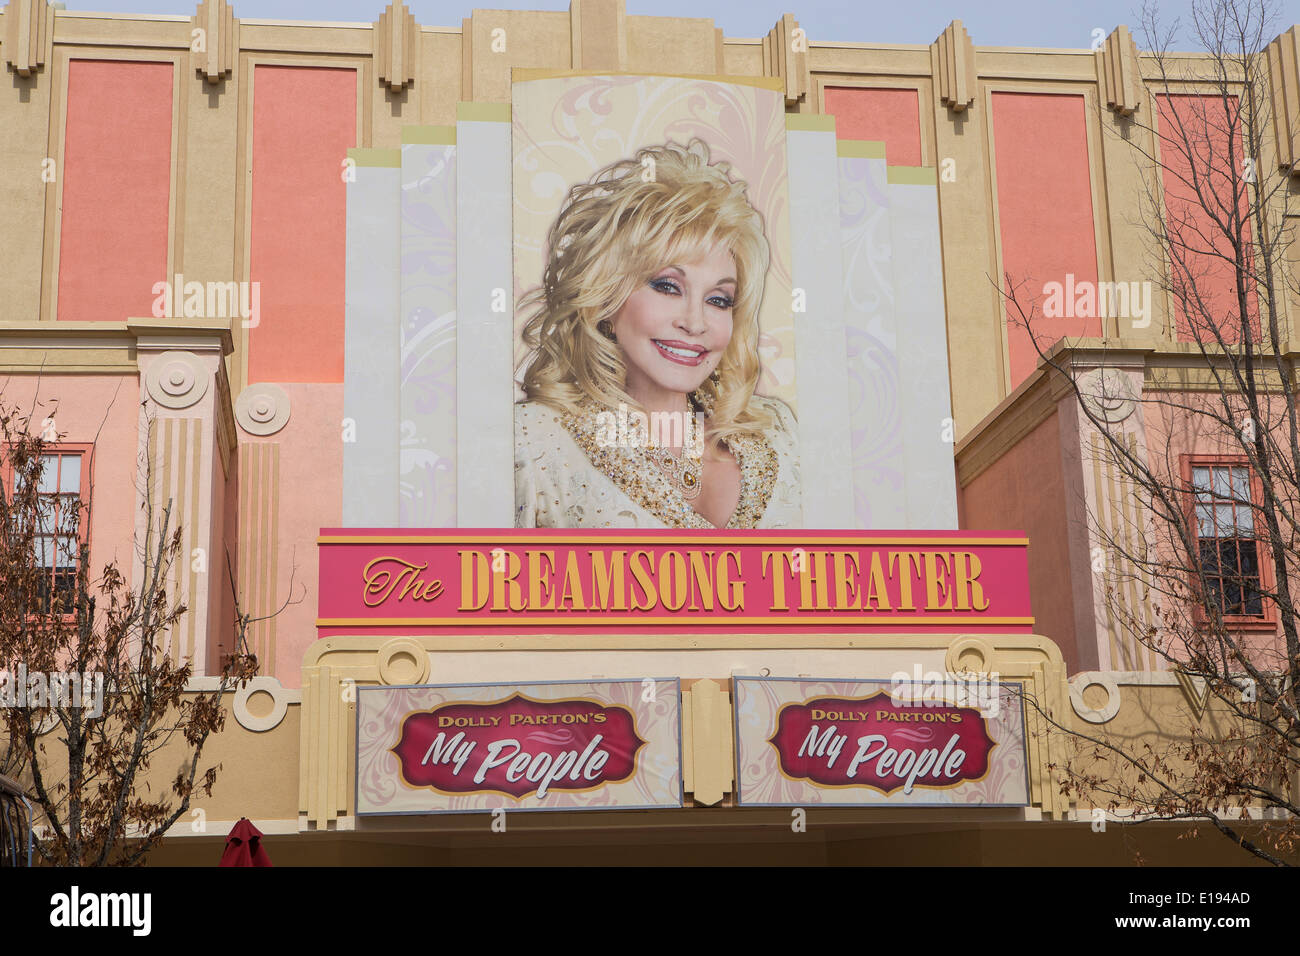 Dreamsong Theater ist im Themenpark Dollywood in Pigeon Forge, Tennessee abgebildet. Stockfoto